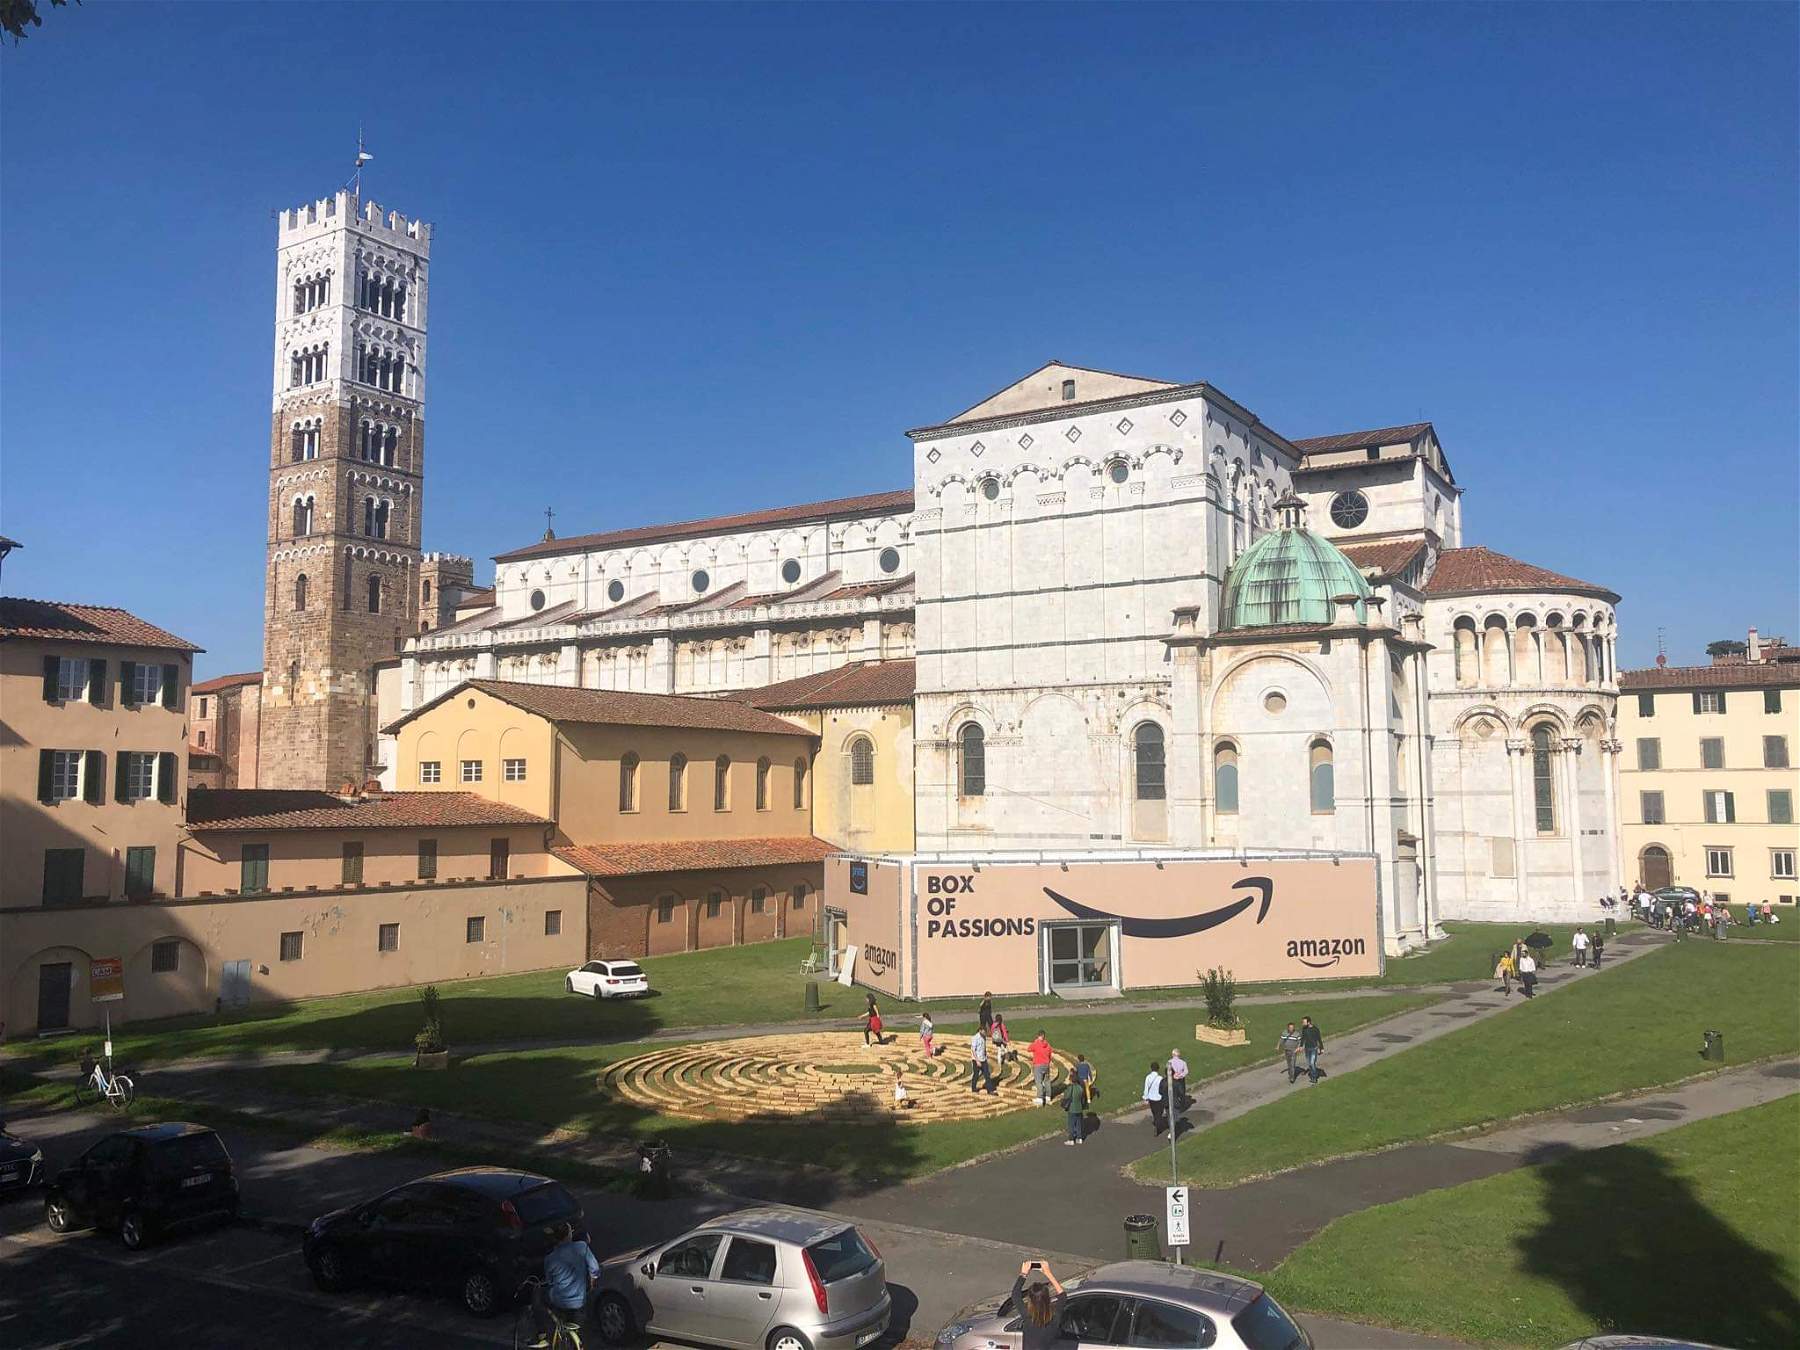 Lucca, Cathedral apsidal area turned into emoticon with invasive Amazon box